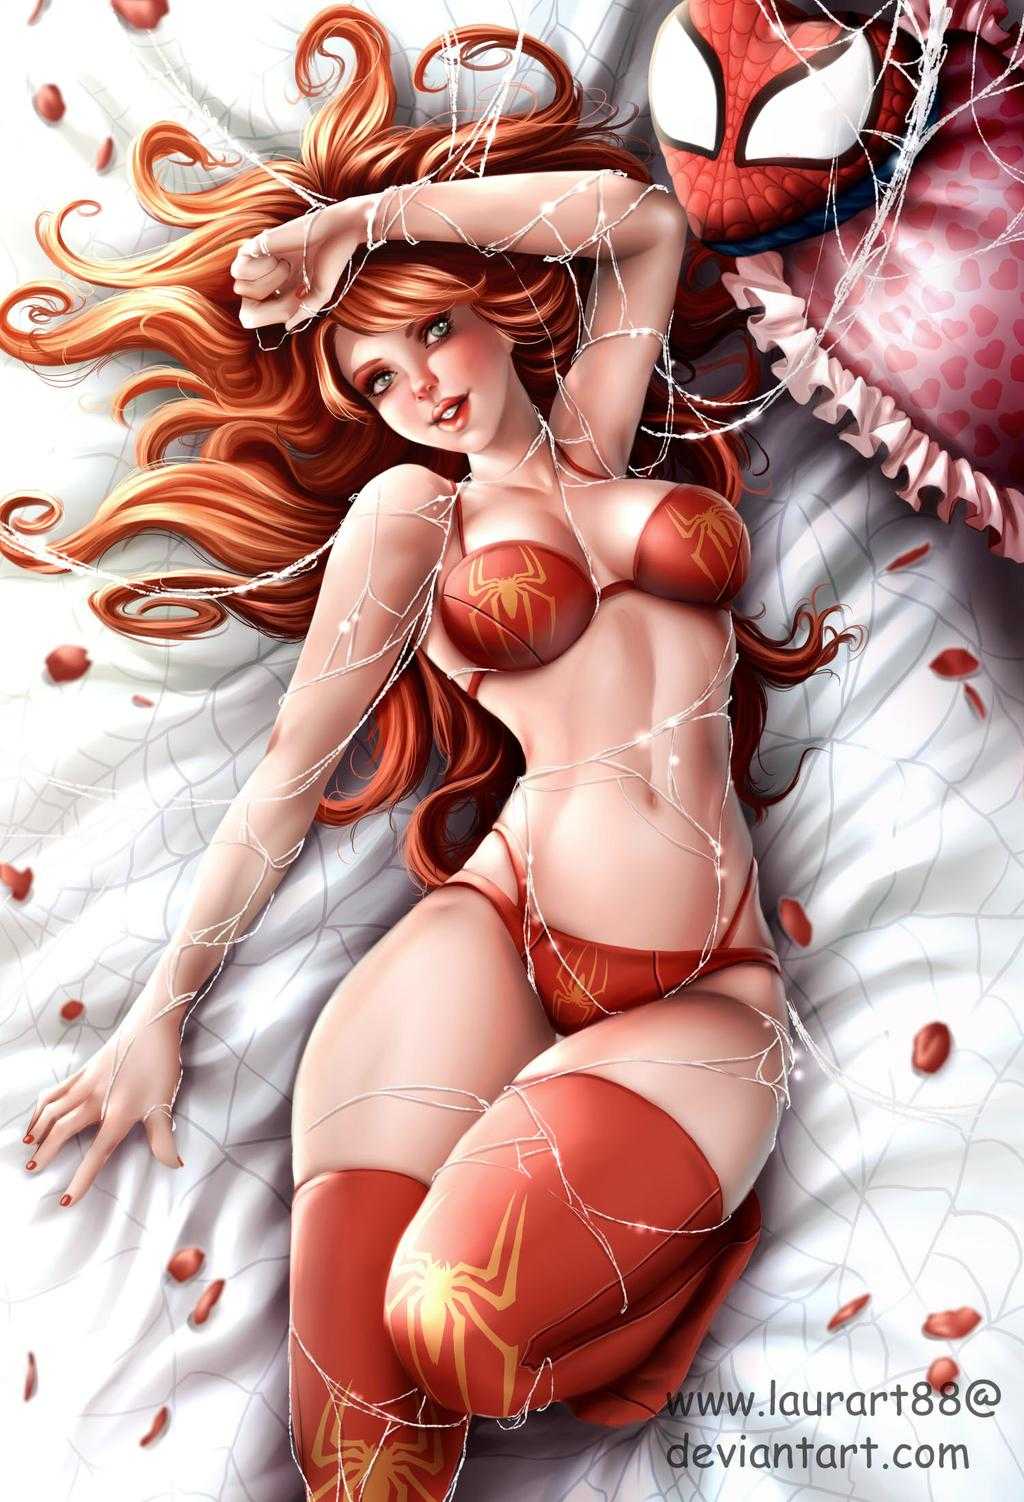 51 Hot Pictures Of Mary Jane Watson Which Demonstrate She Is The Hottest La...